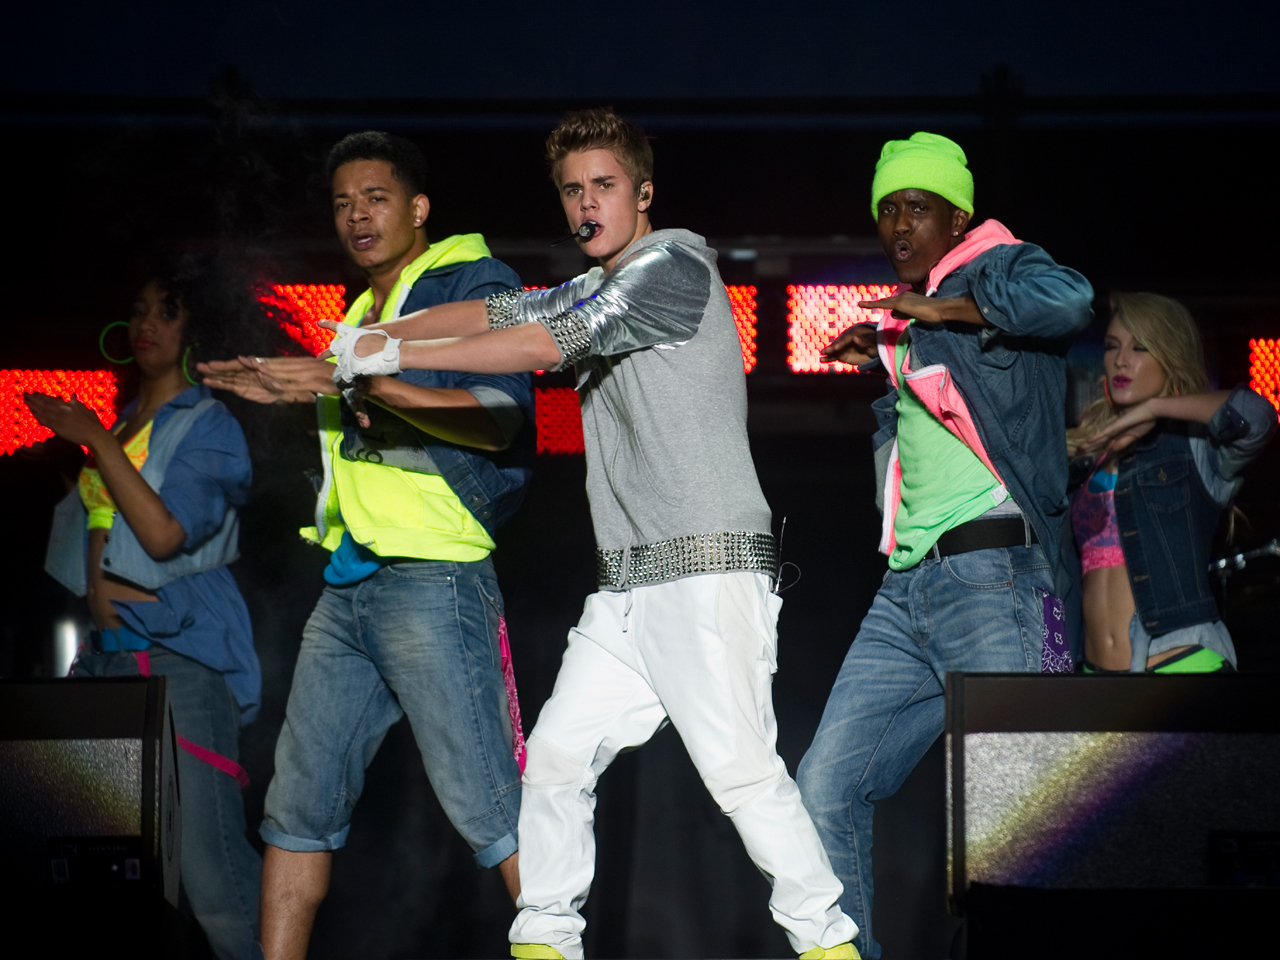 Justin Bieber's free concert draws thousands in Mexico City - CBS News1280 x 960